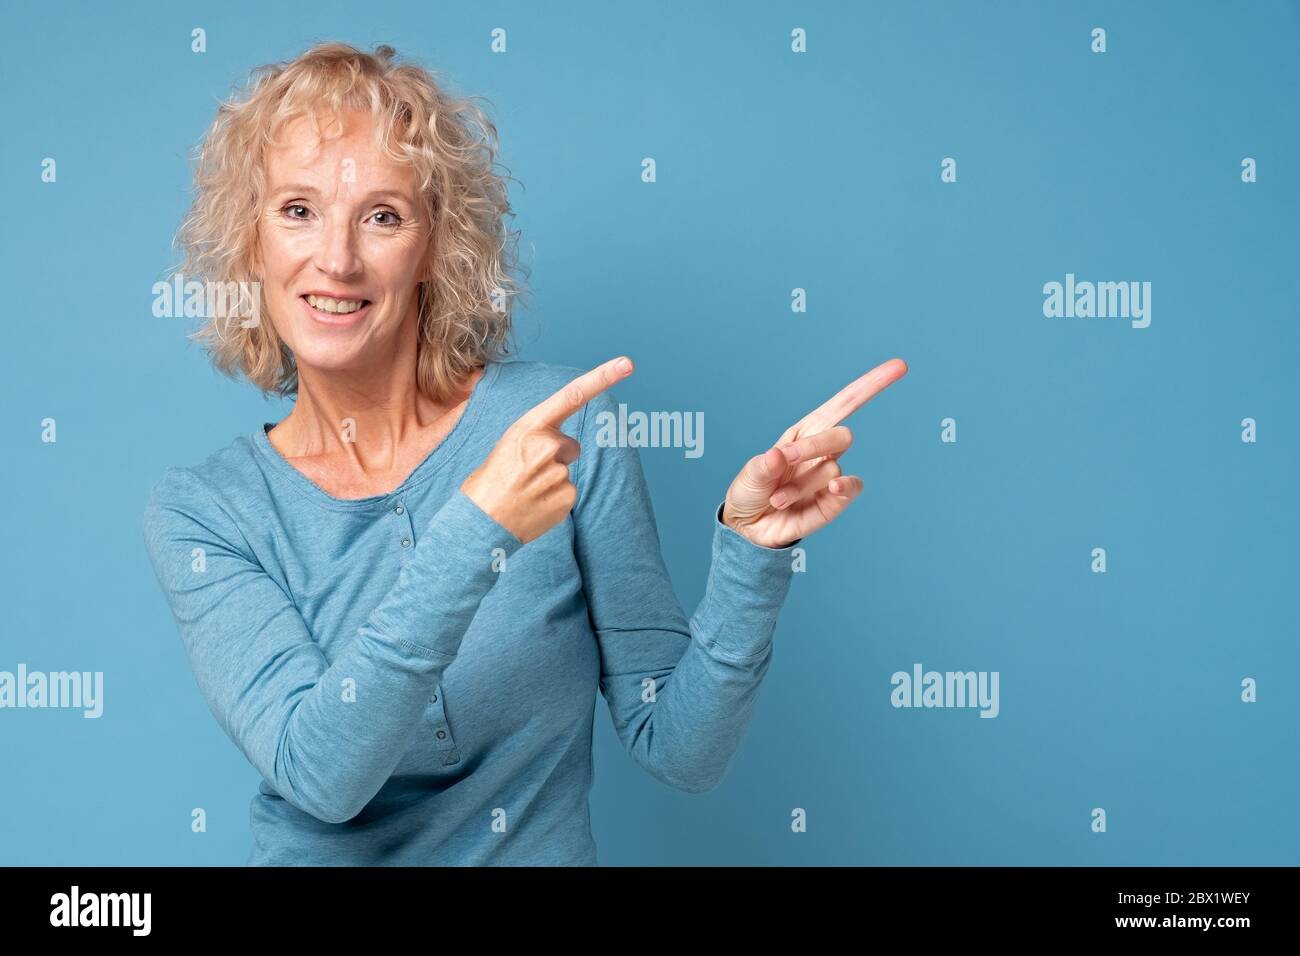 mature woman with dyed blonde hair smiling cheerfully and pointing on copyspace. Stock Photo